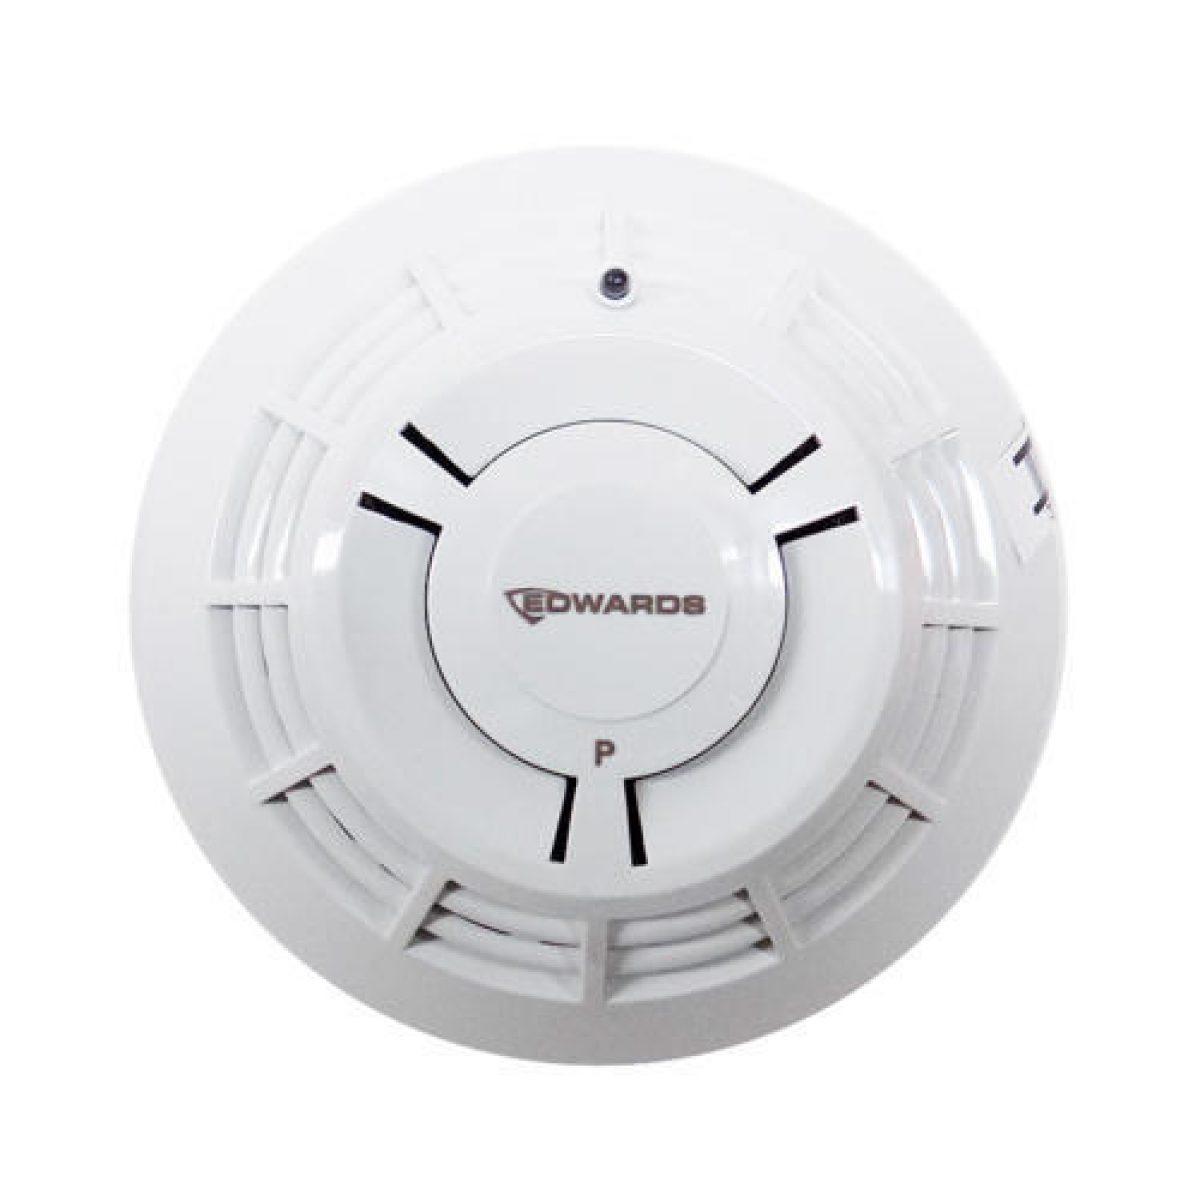 NEW EST EDWARDS FIRE ALARM DETECTOR BASE 6251B-001A FREE SHIPPING 